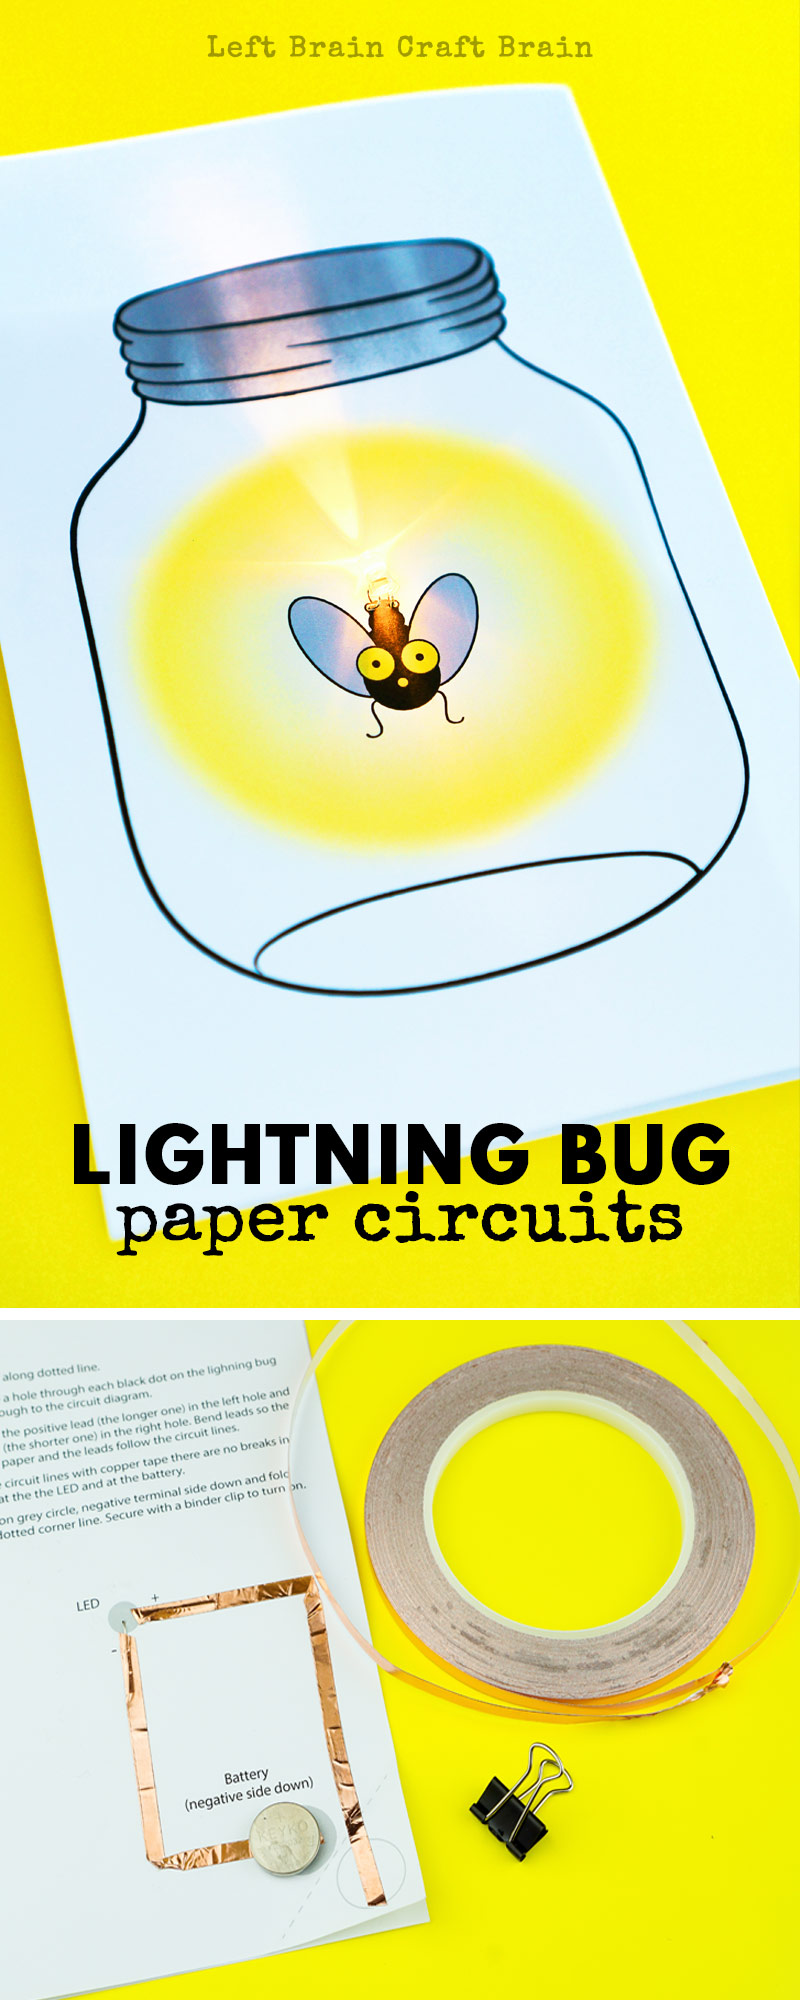 This Glowing Lightning Bug Paper Circuit Card is a perfect project for STEM and STEAM learning at home or school or your favorite makerspace! Be sure to add this to your favorite summer STEAM project list!